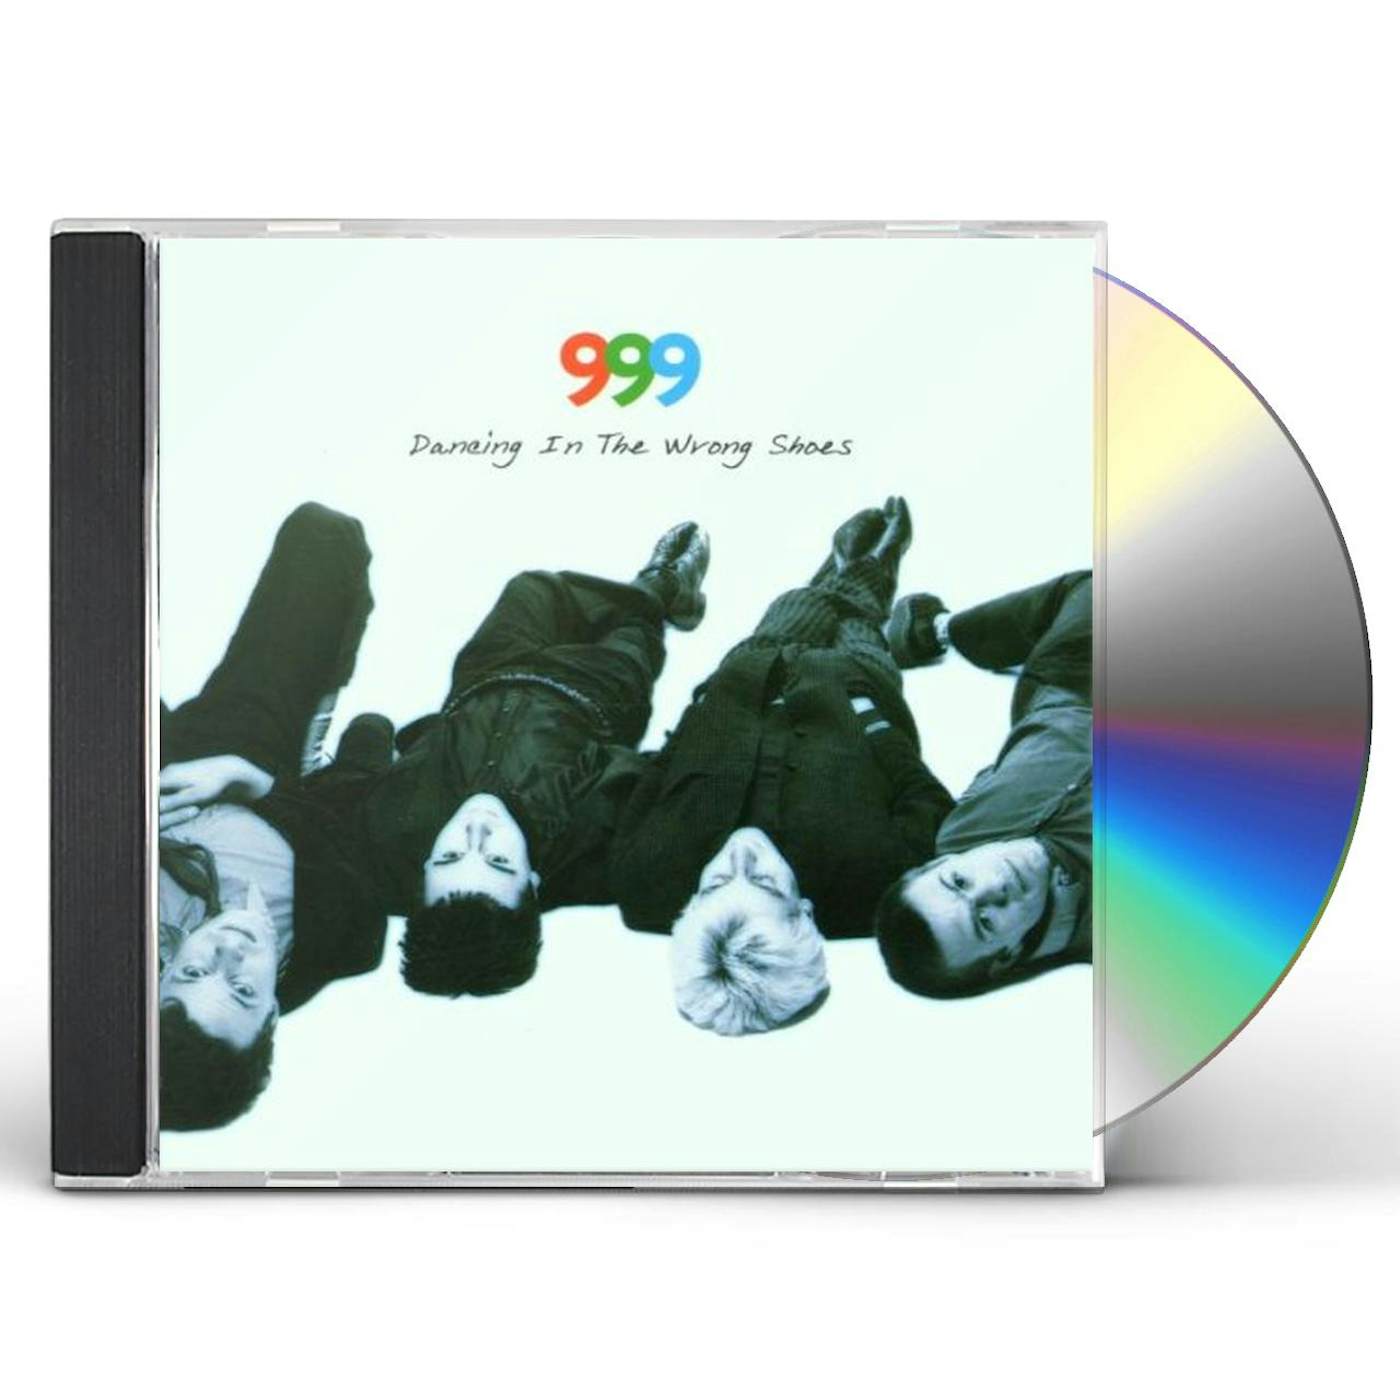 999 DANCING IN THE WRONG SHOES CD